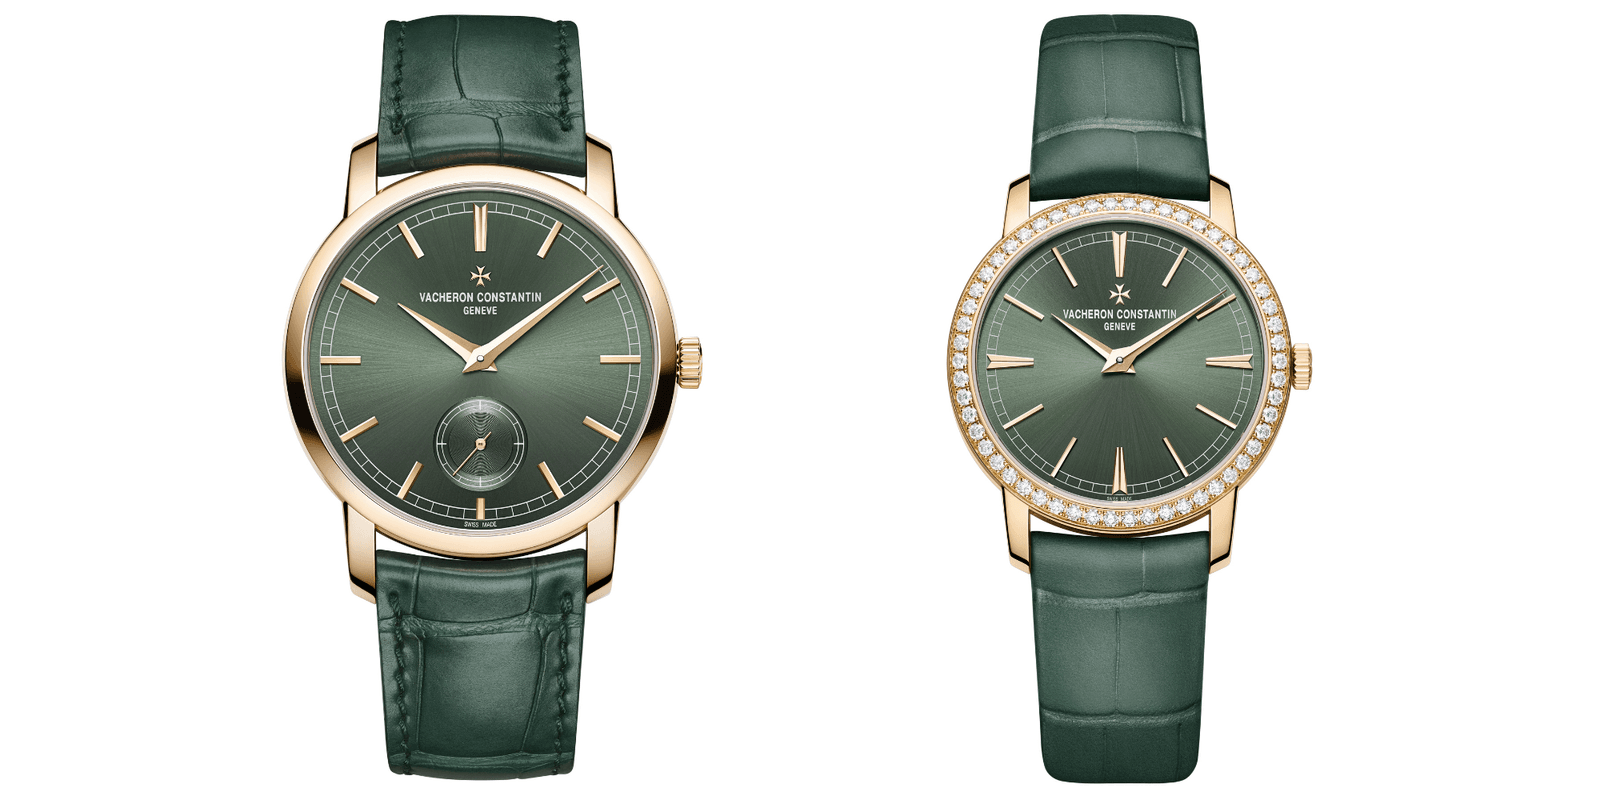 The Traditionnelle collection gets two models featuring a majestic green sunburst dial and a pink gold case